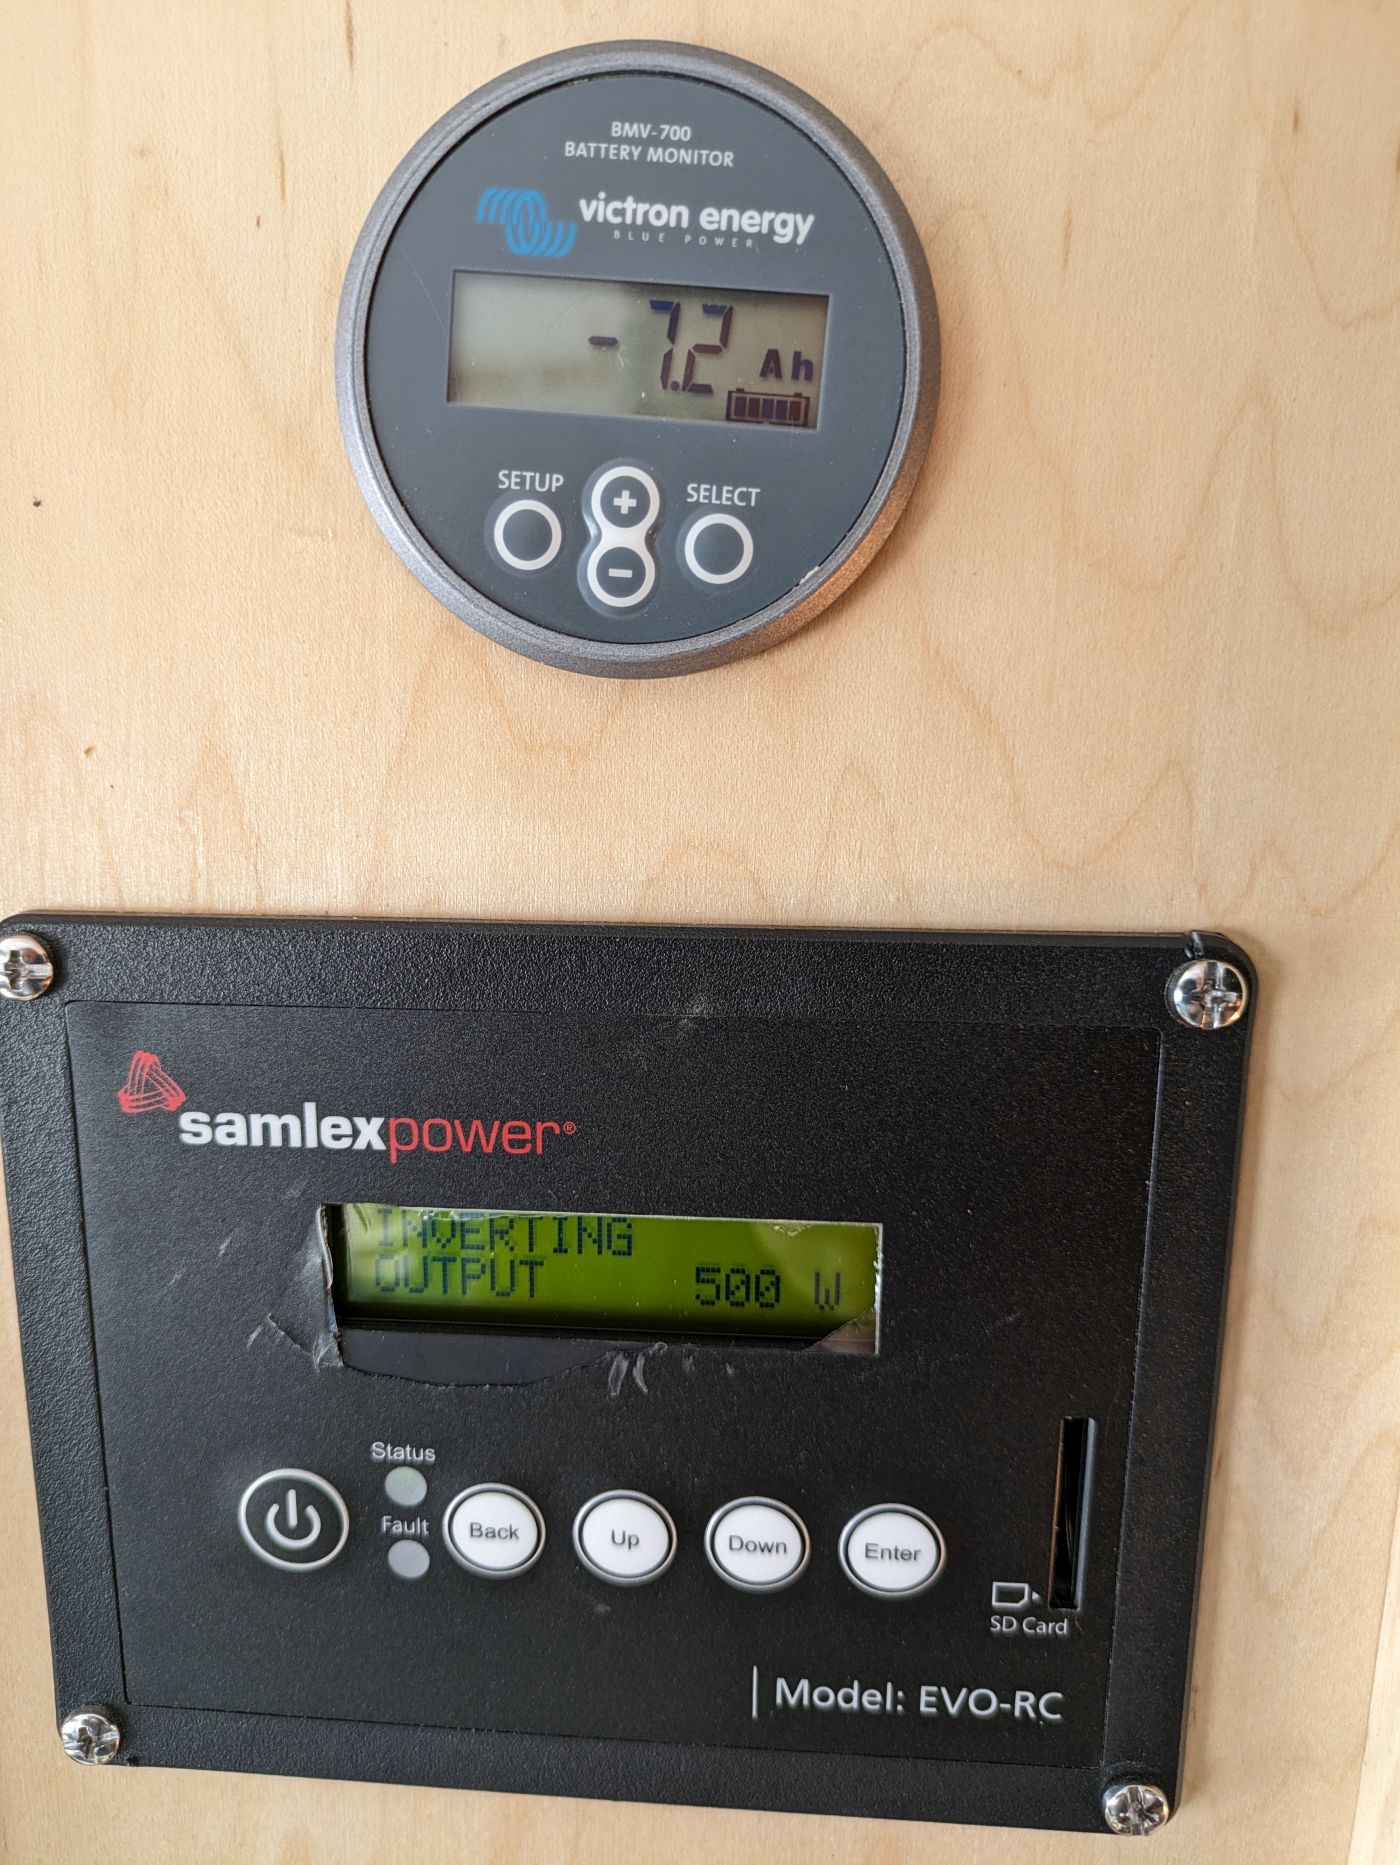 The battery monitor and inverter control panel.